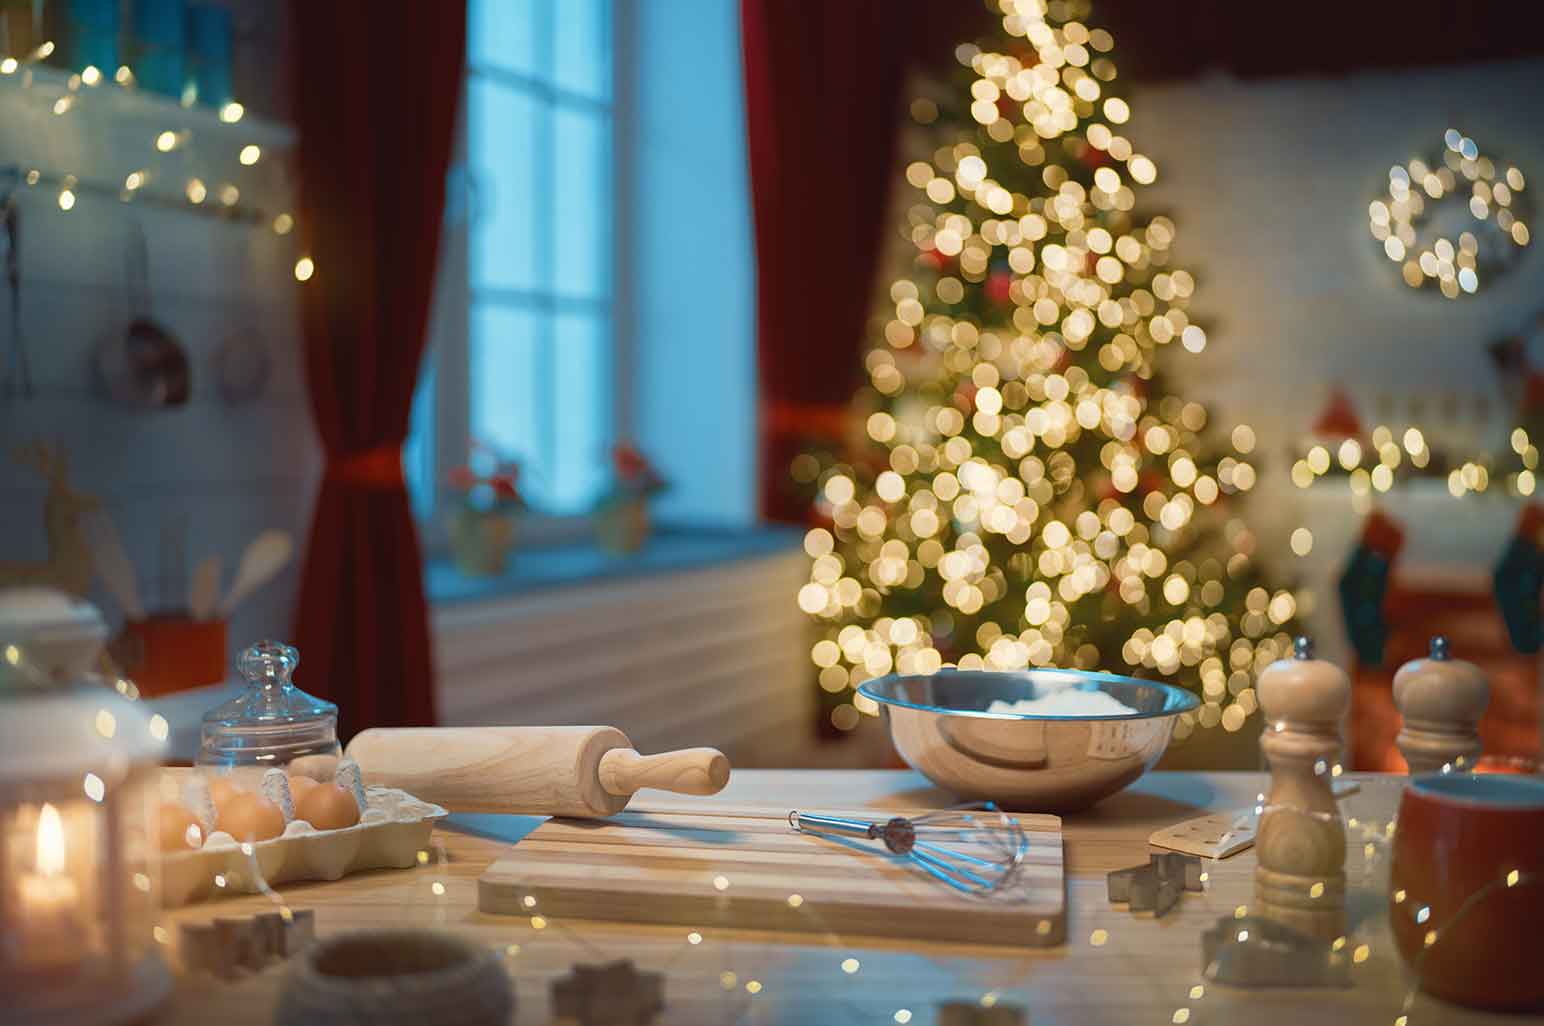 Getting Your Kitchen Organized for Holiday Cooking and Entertaining